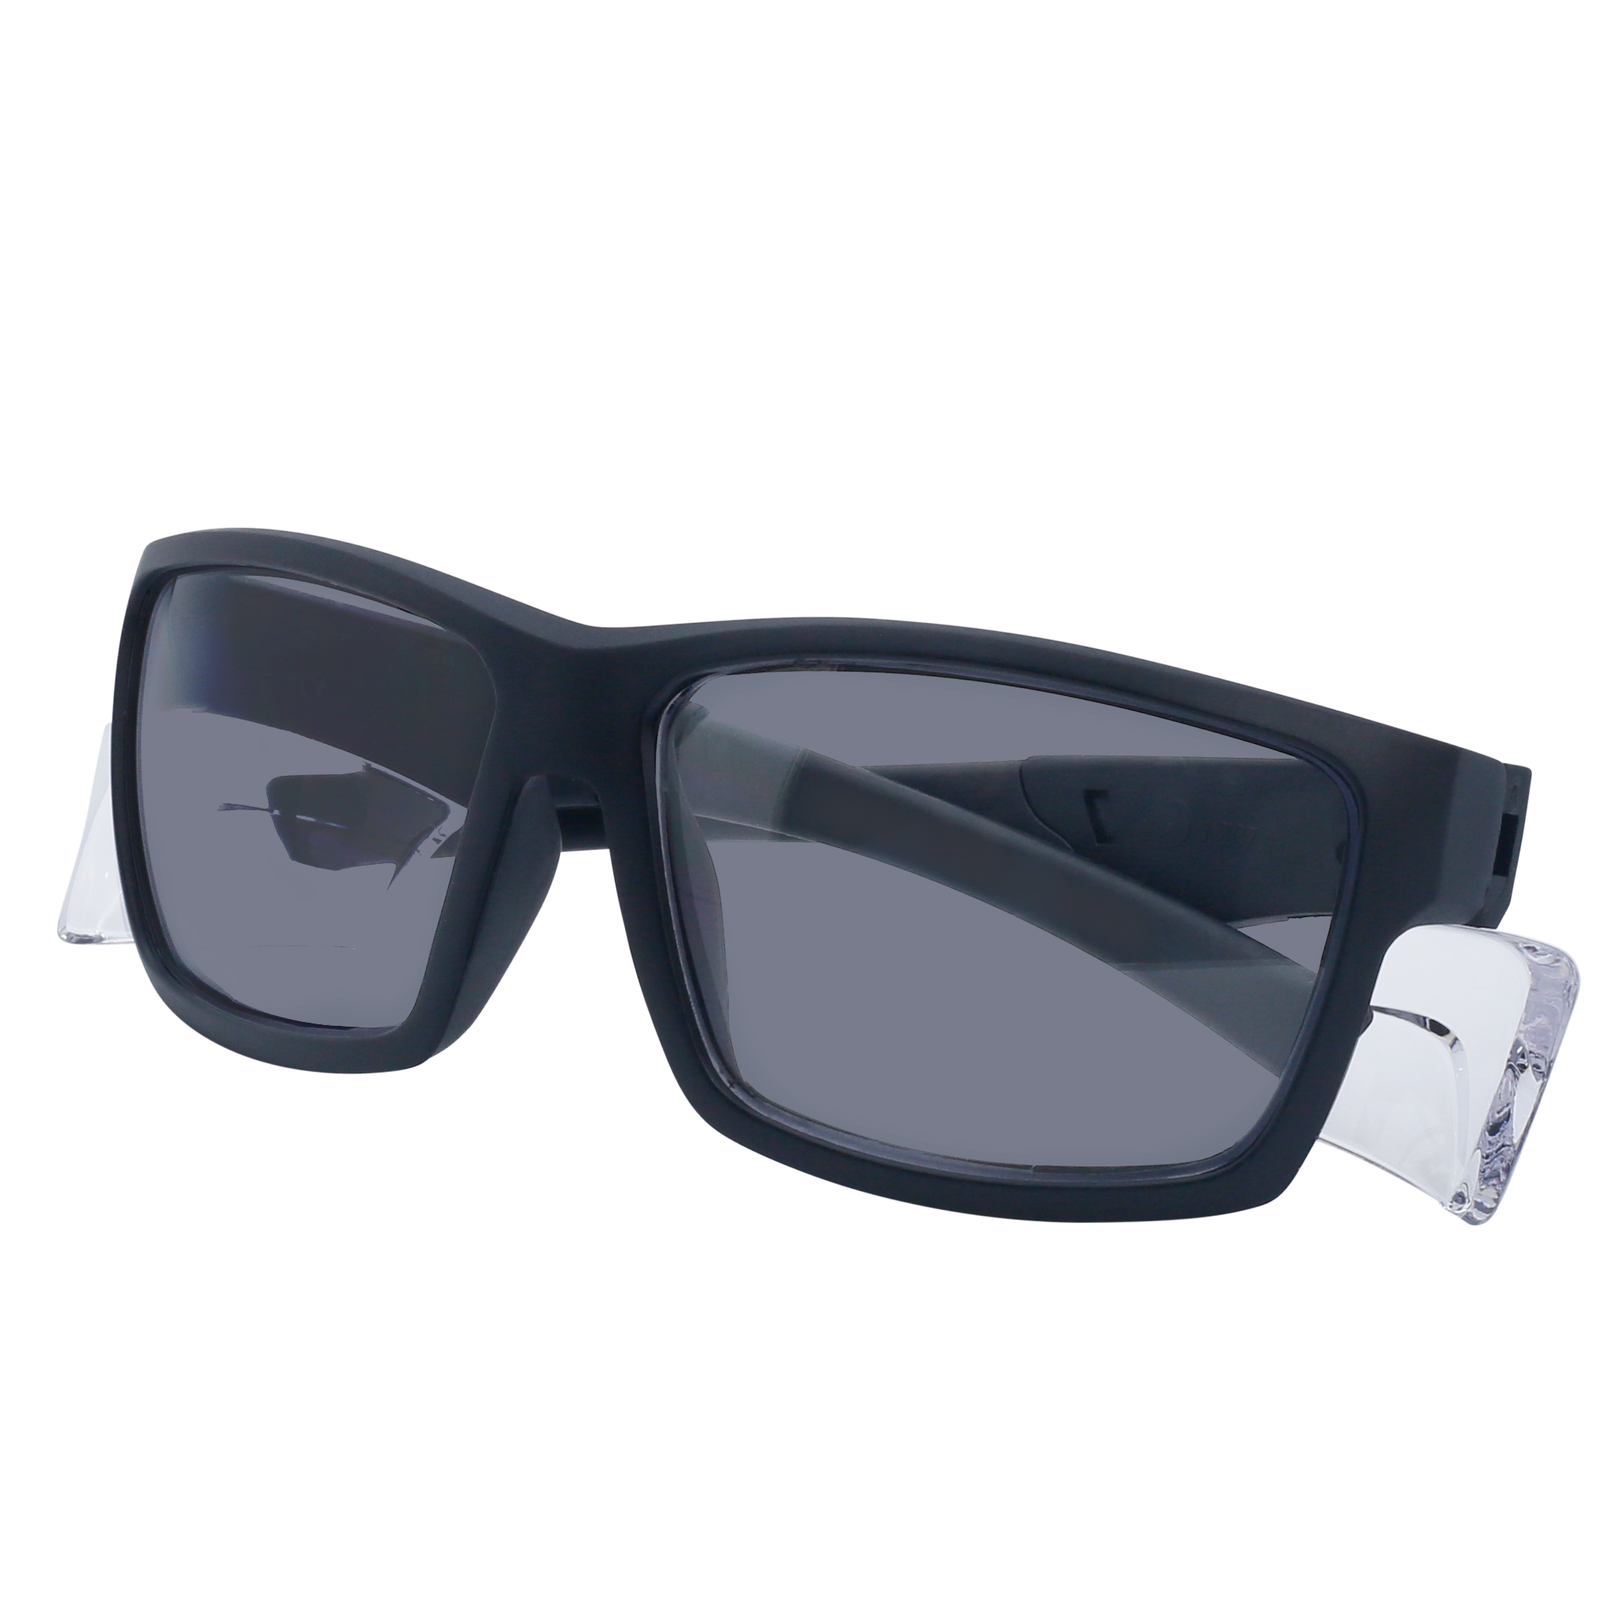 Image shows a diagonal view of the JORESTECH safety sun glasses with clear side shield for high impact protection with the temples closed. These safety glasses with clear side shields are ANSI and have black frame and smoke polycarbonate lenses. The background of the image is white